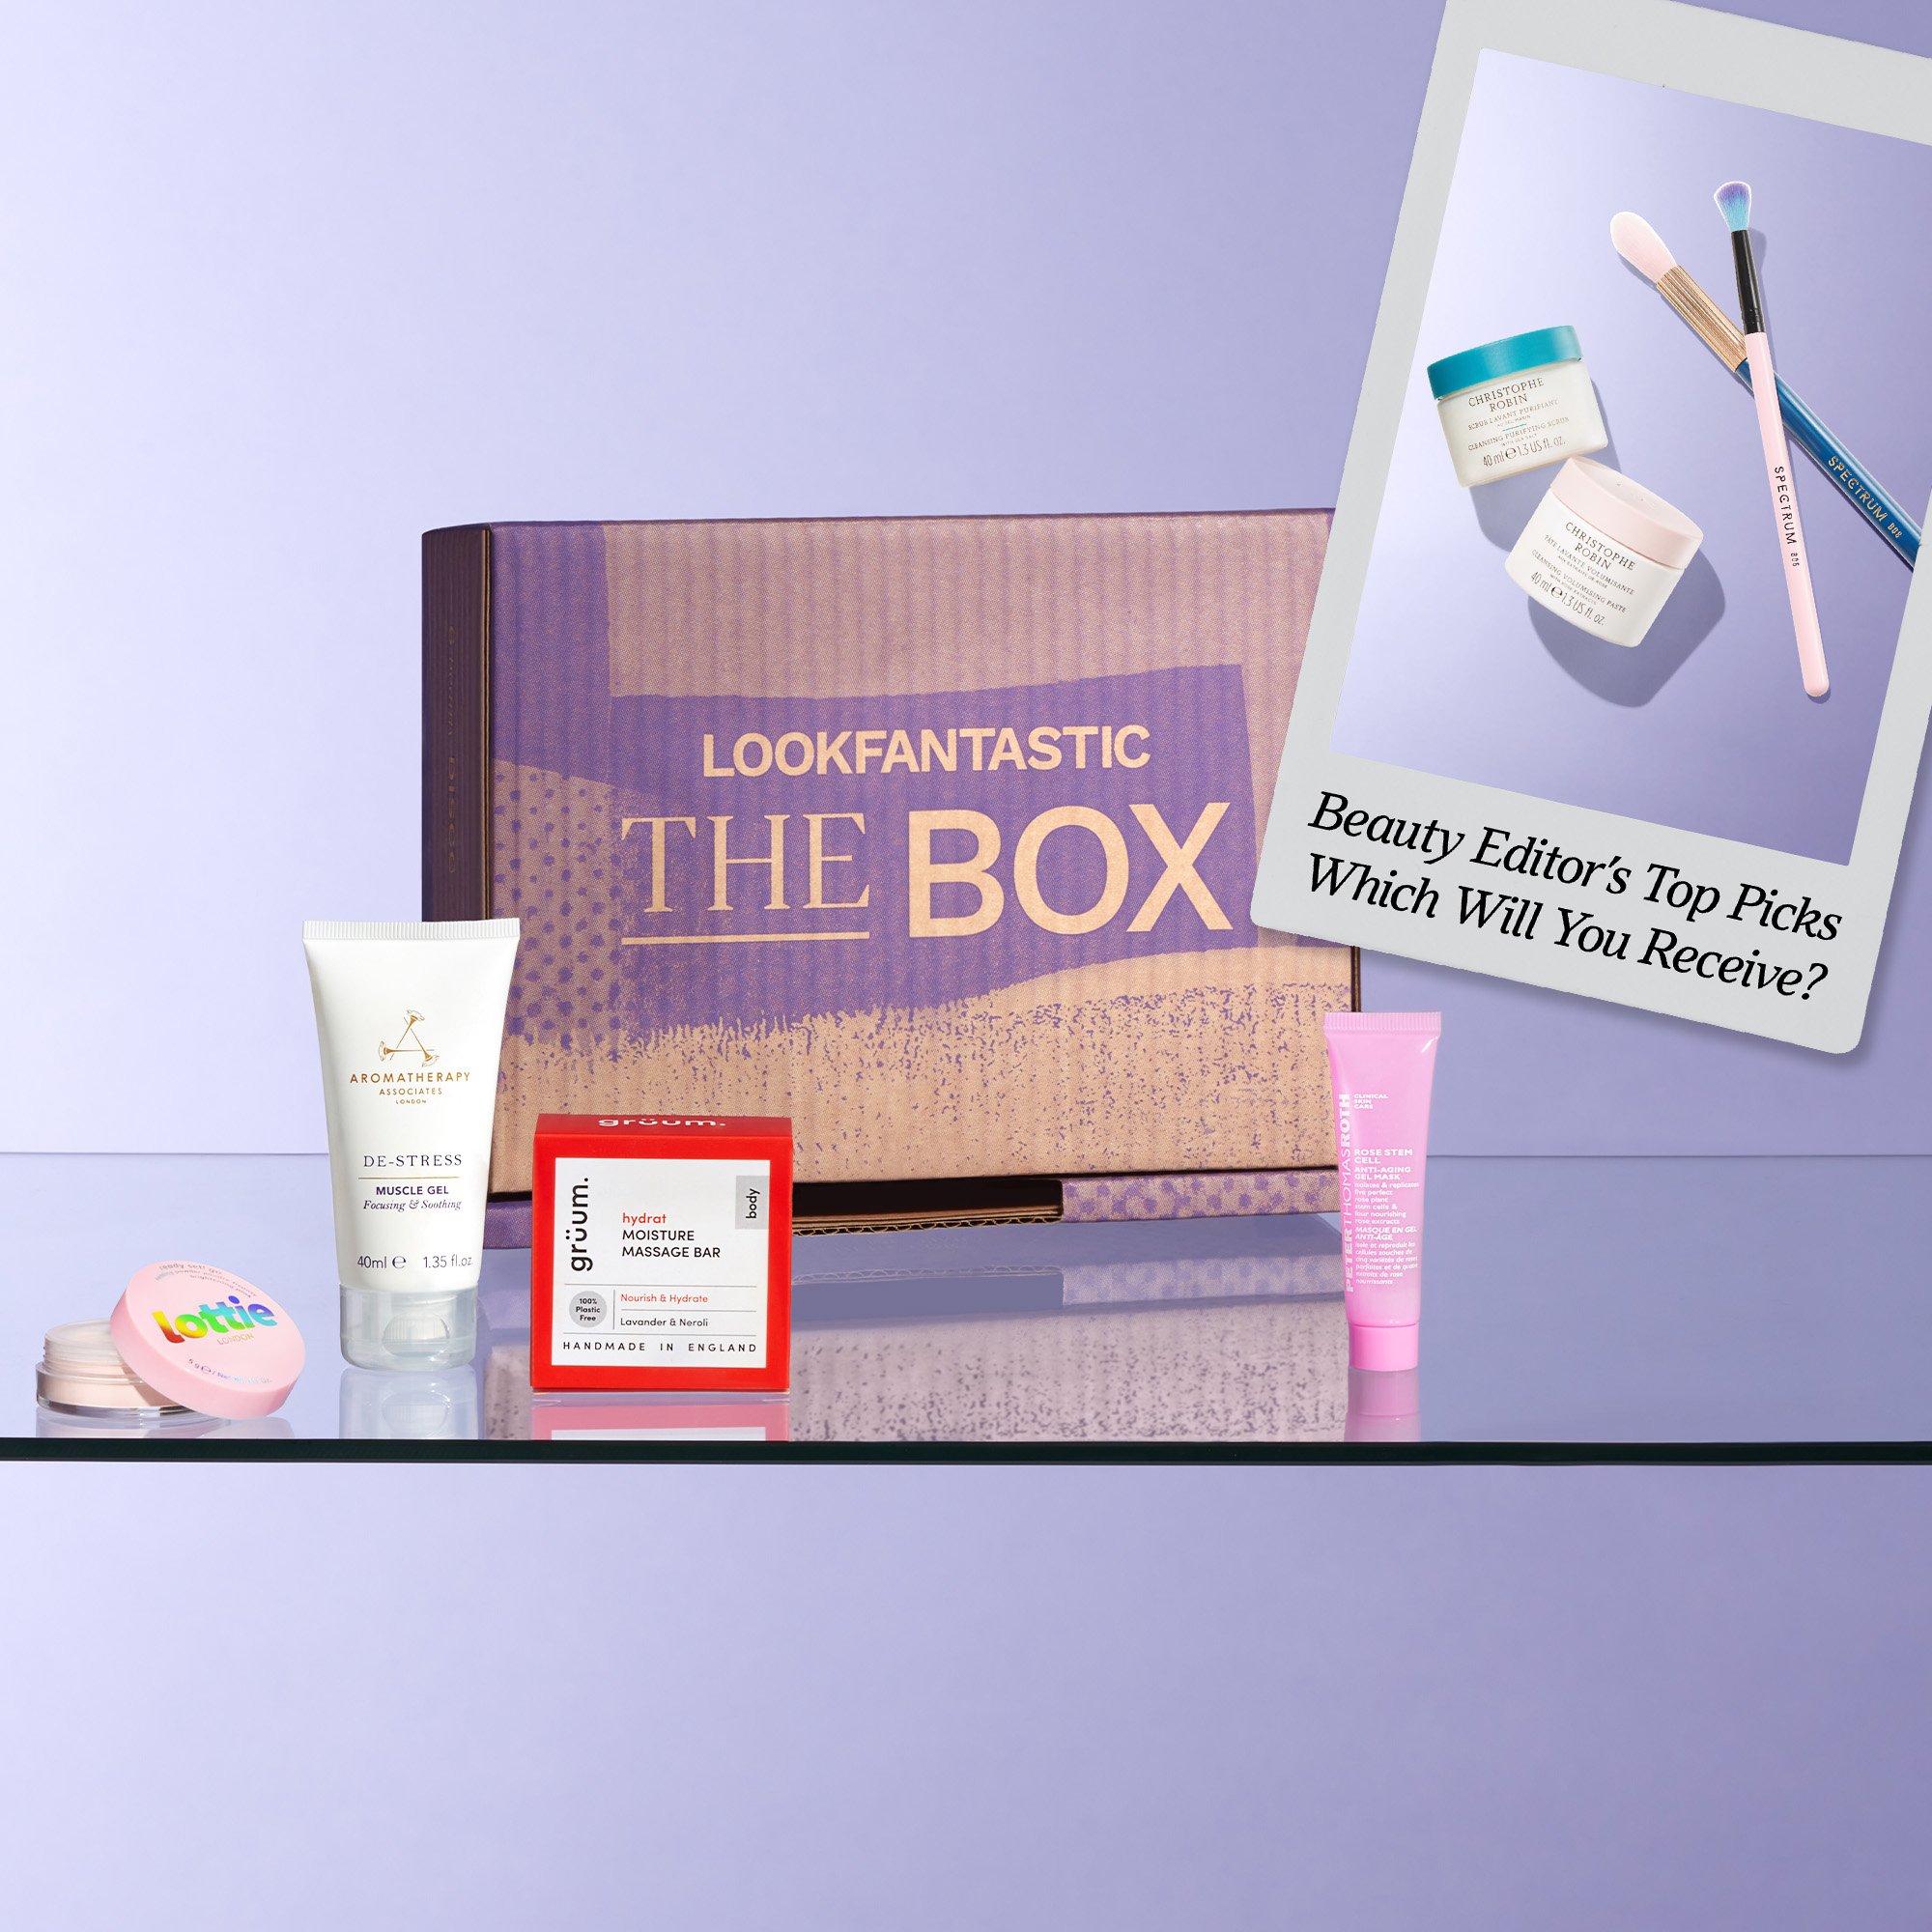 What’s inside THE BOX this month?